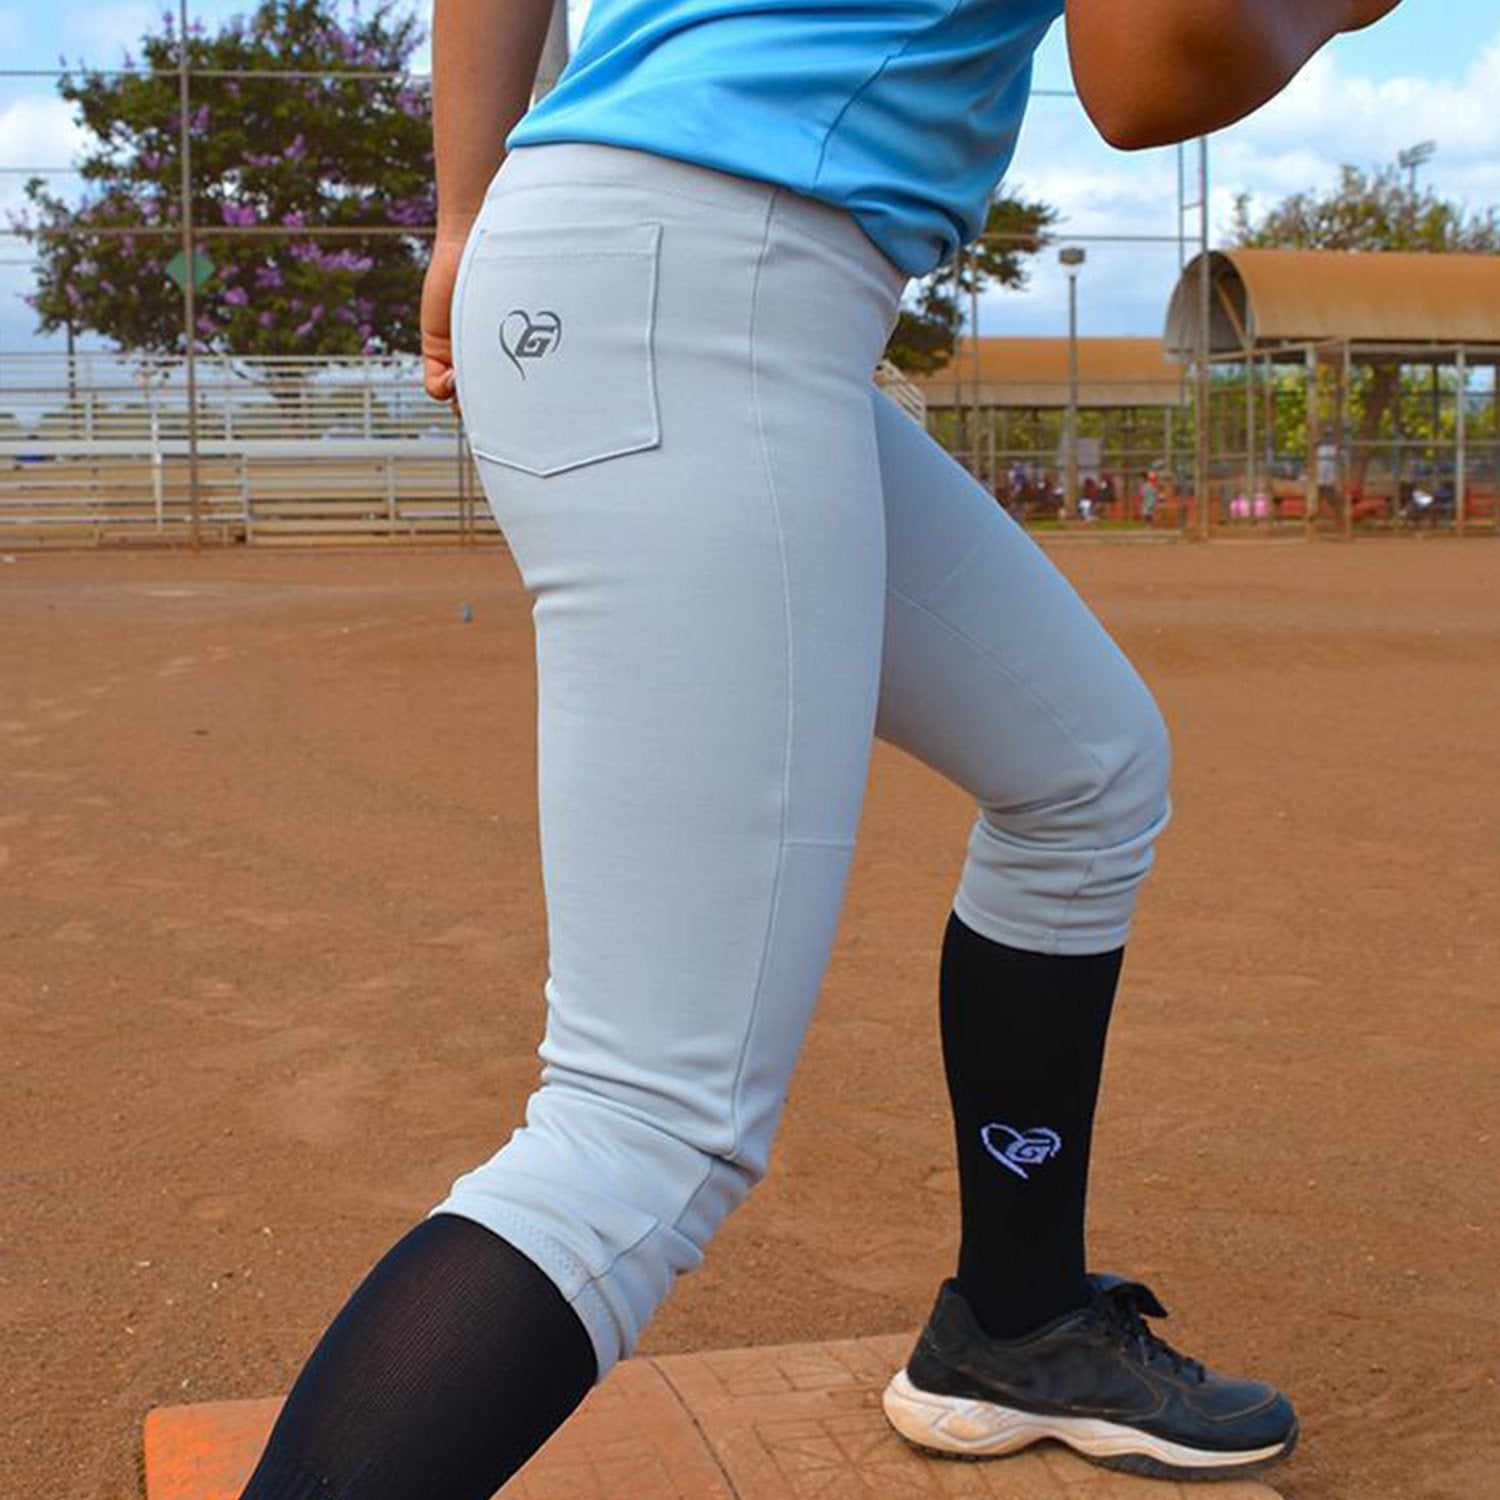 BELTLESS CHARCOAL SOFTBALL PANTS WITH BRAID – TheGluv Athletique